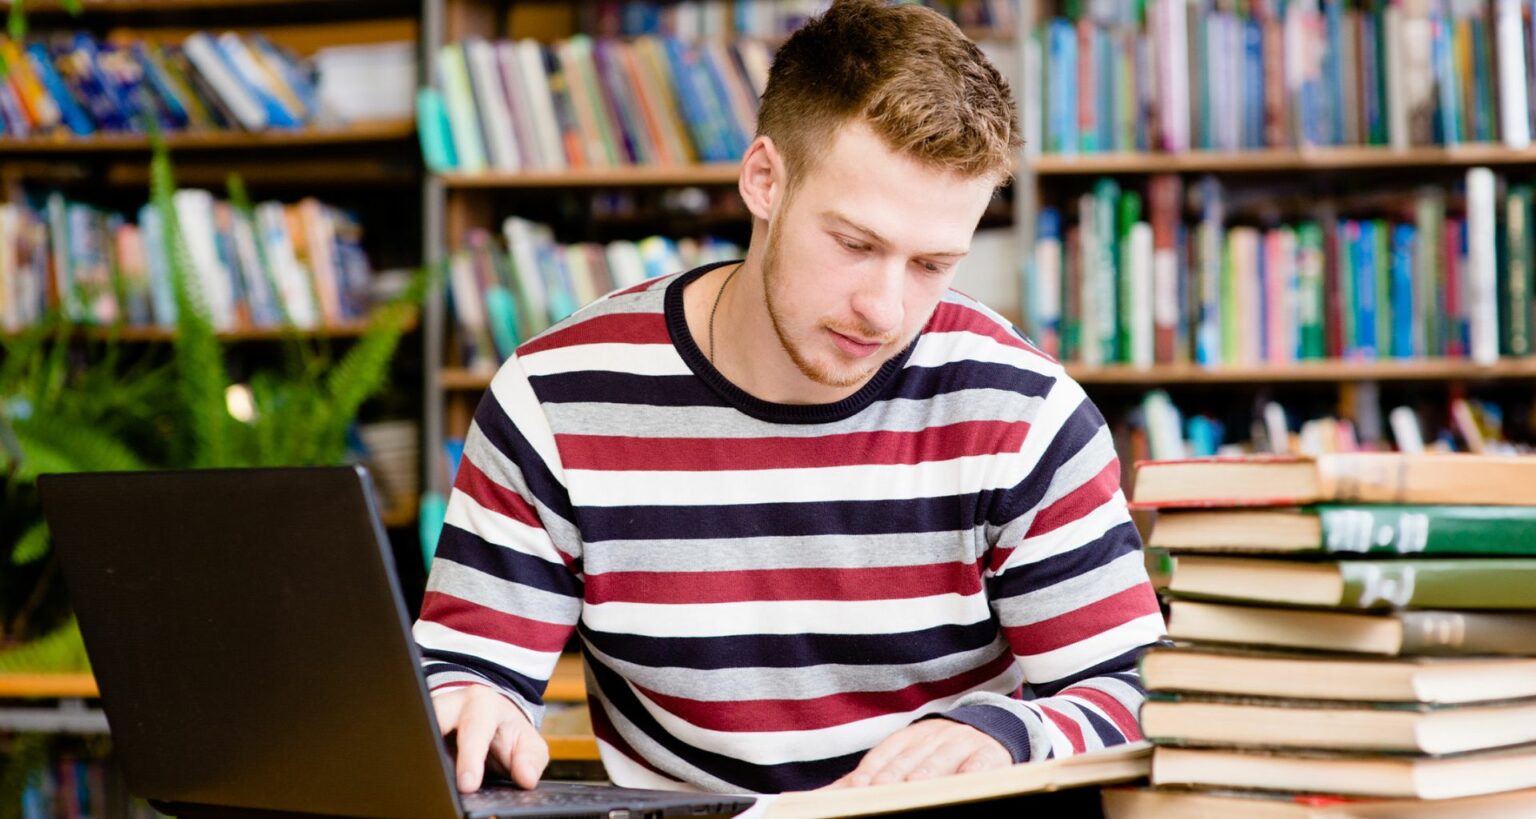 What is a supplemental application for college?